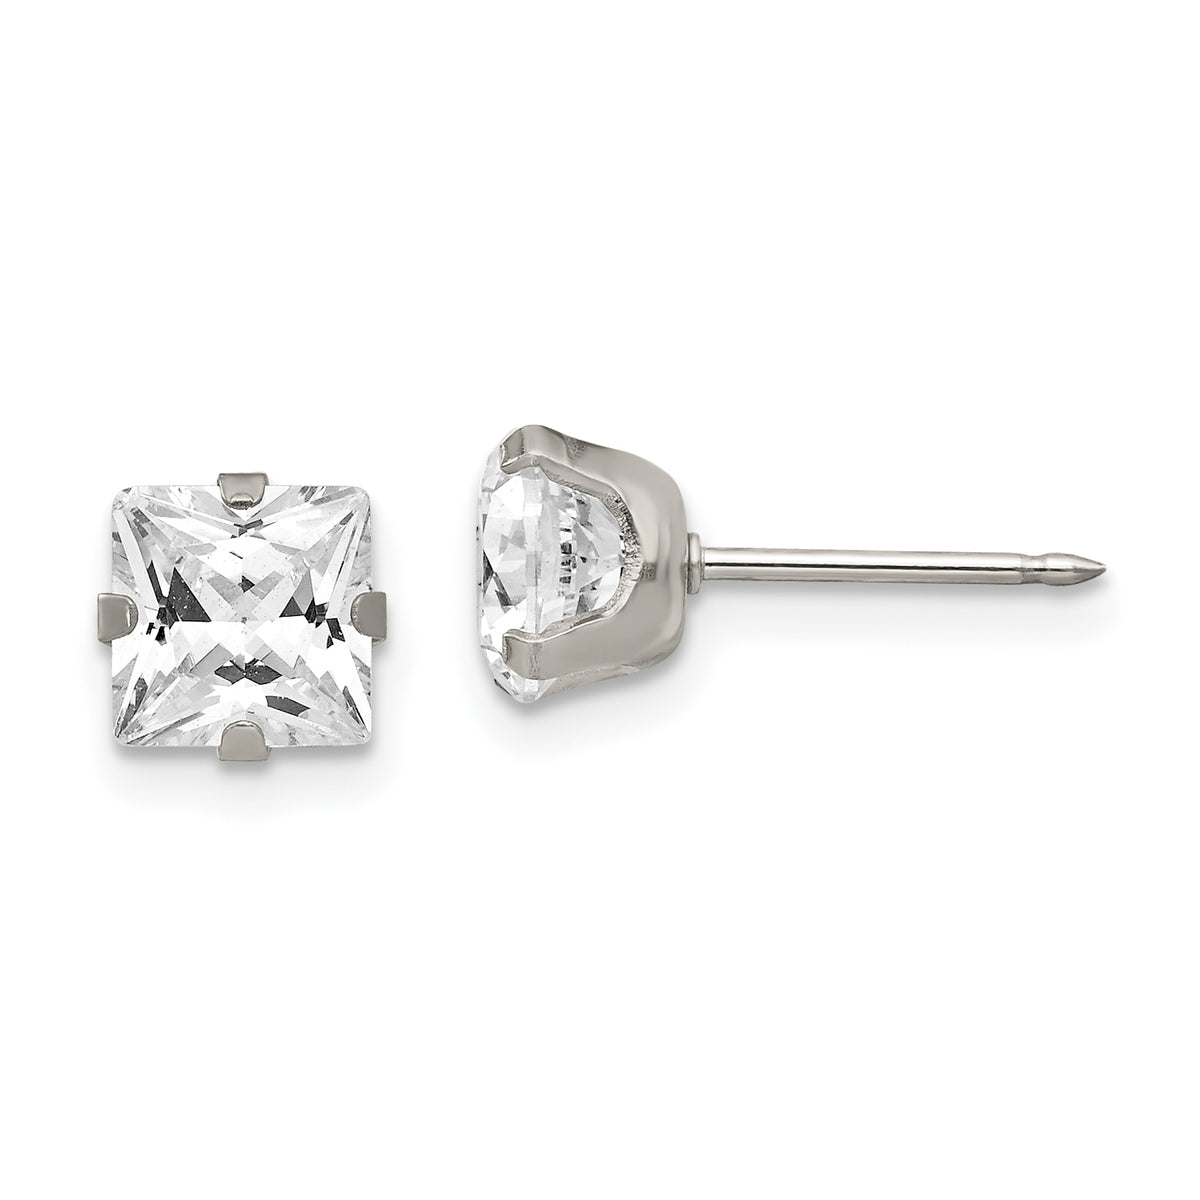 Inverness Stainless Steel 7mm Faceted Square CZ Earrings